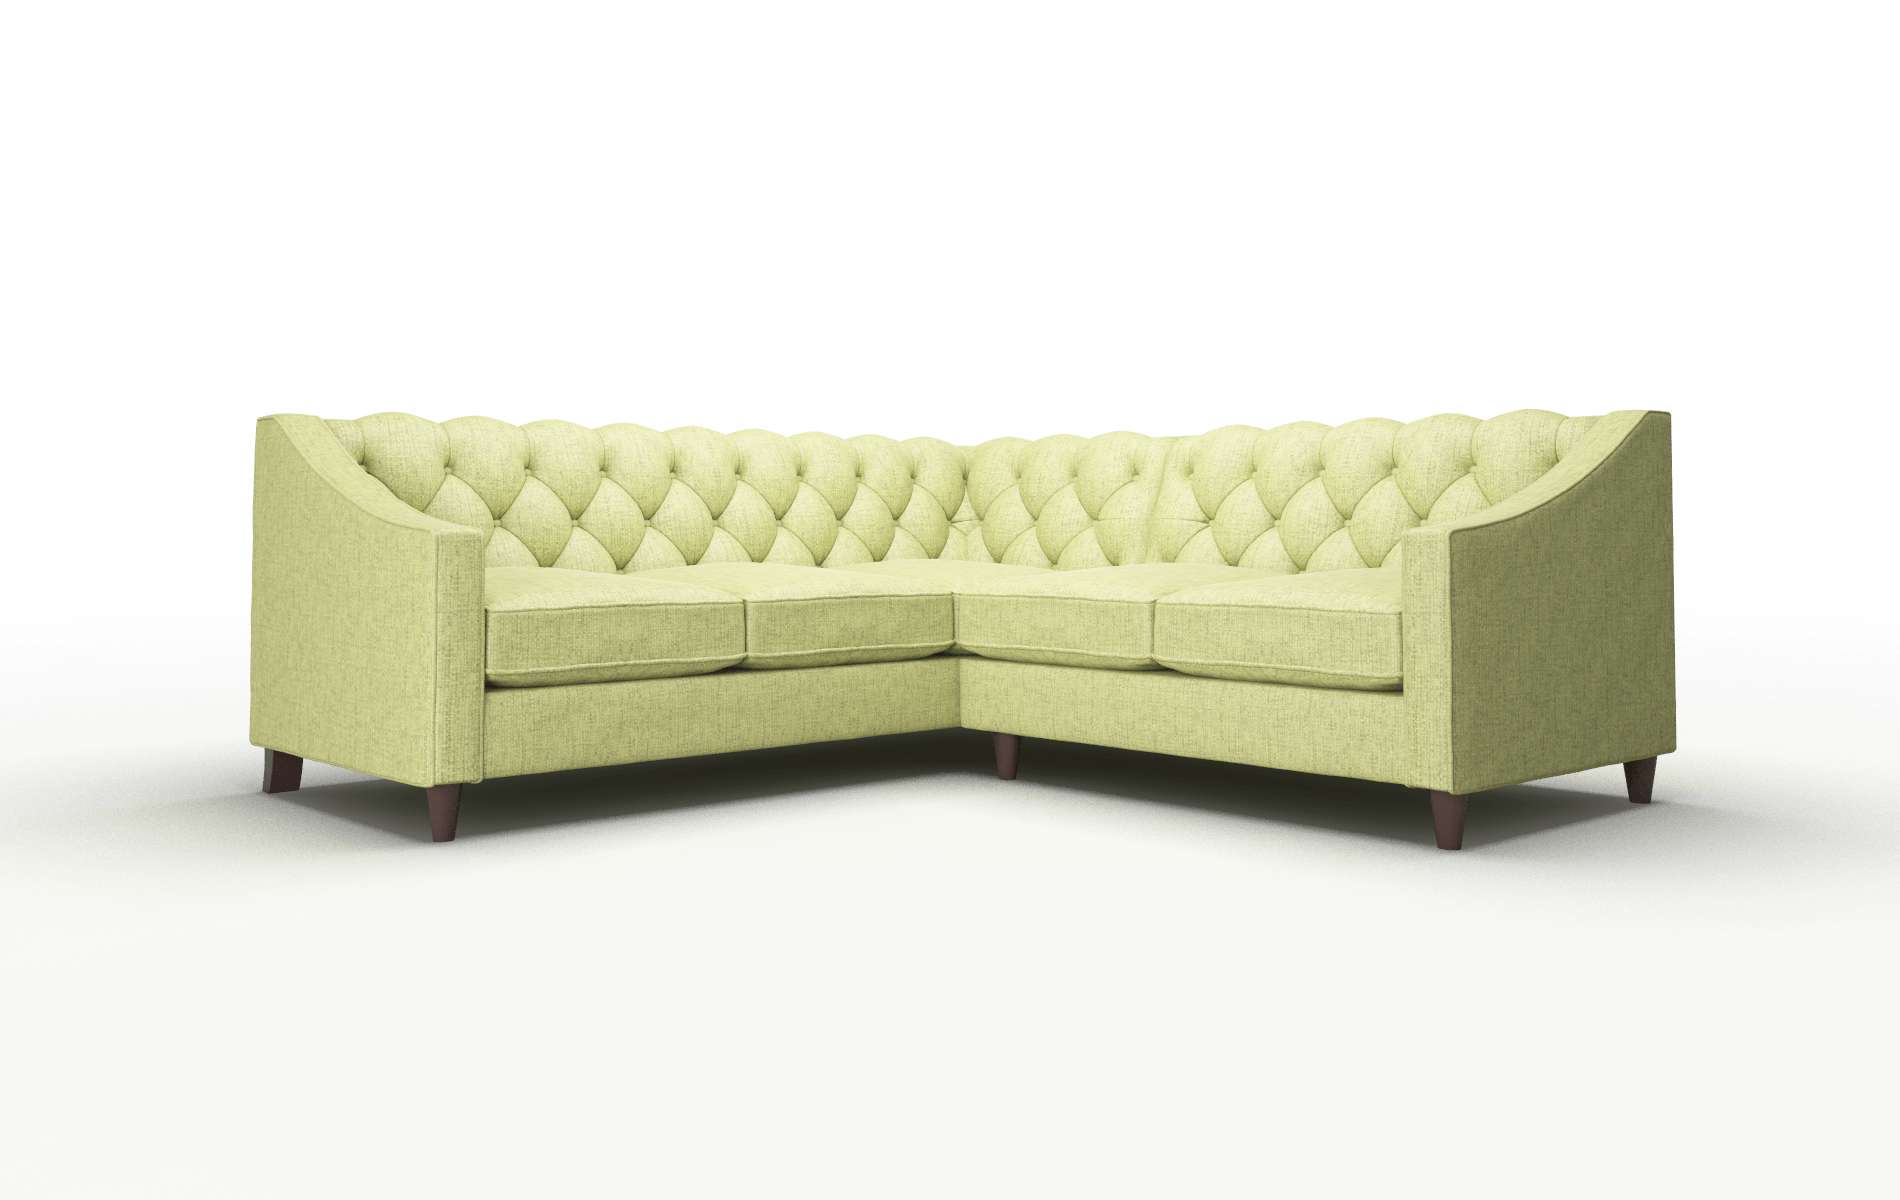 Manchester Notion Appletini Sectional espresso legs